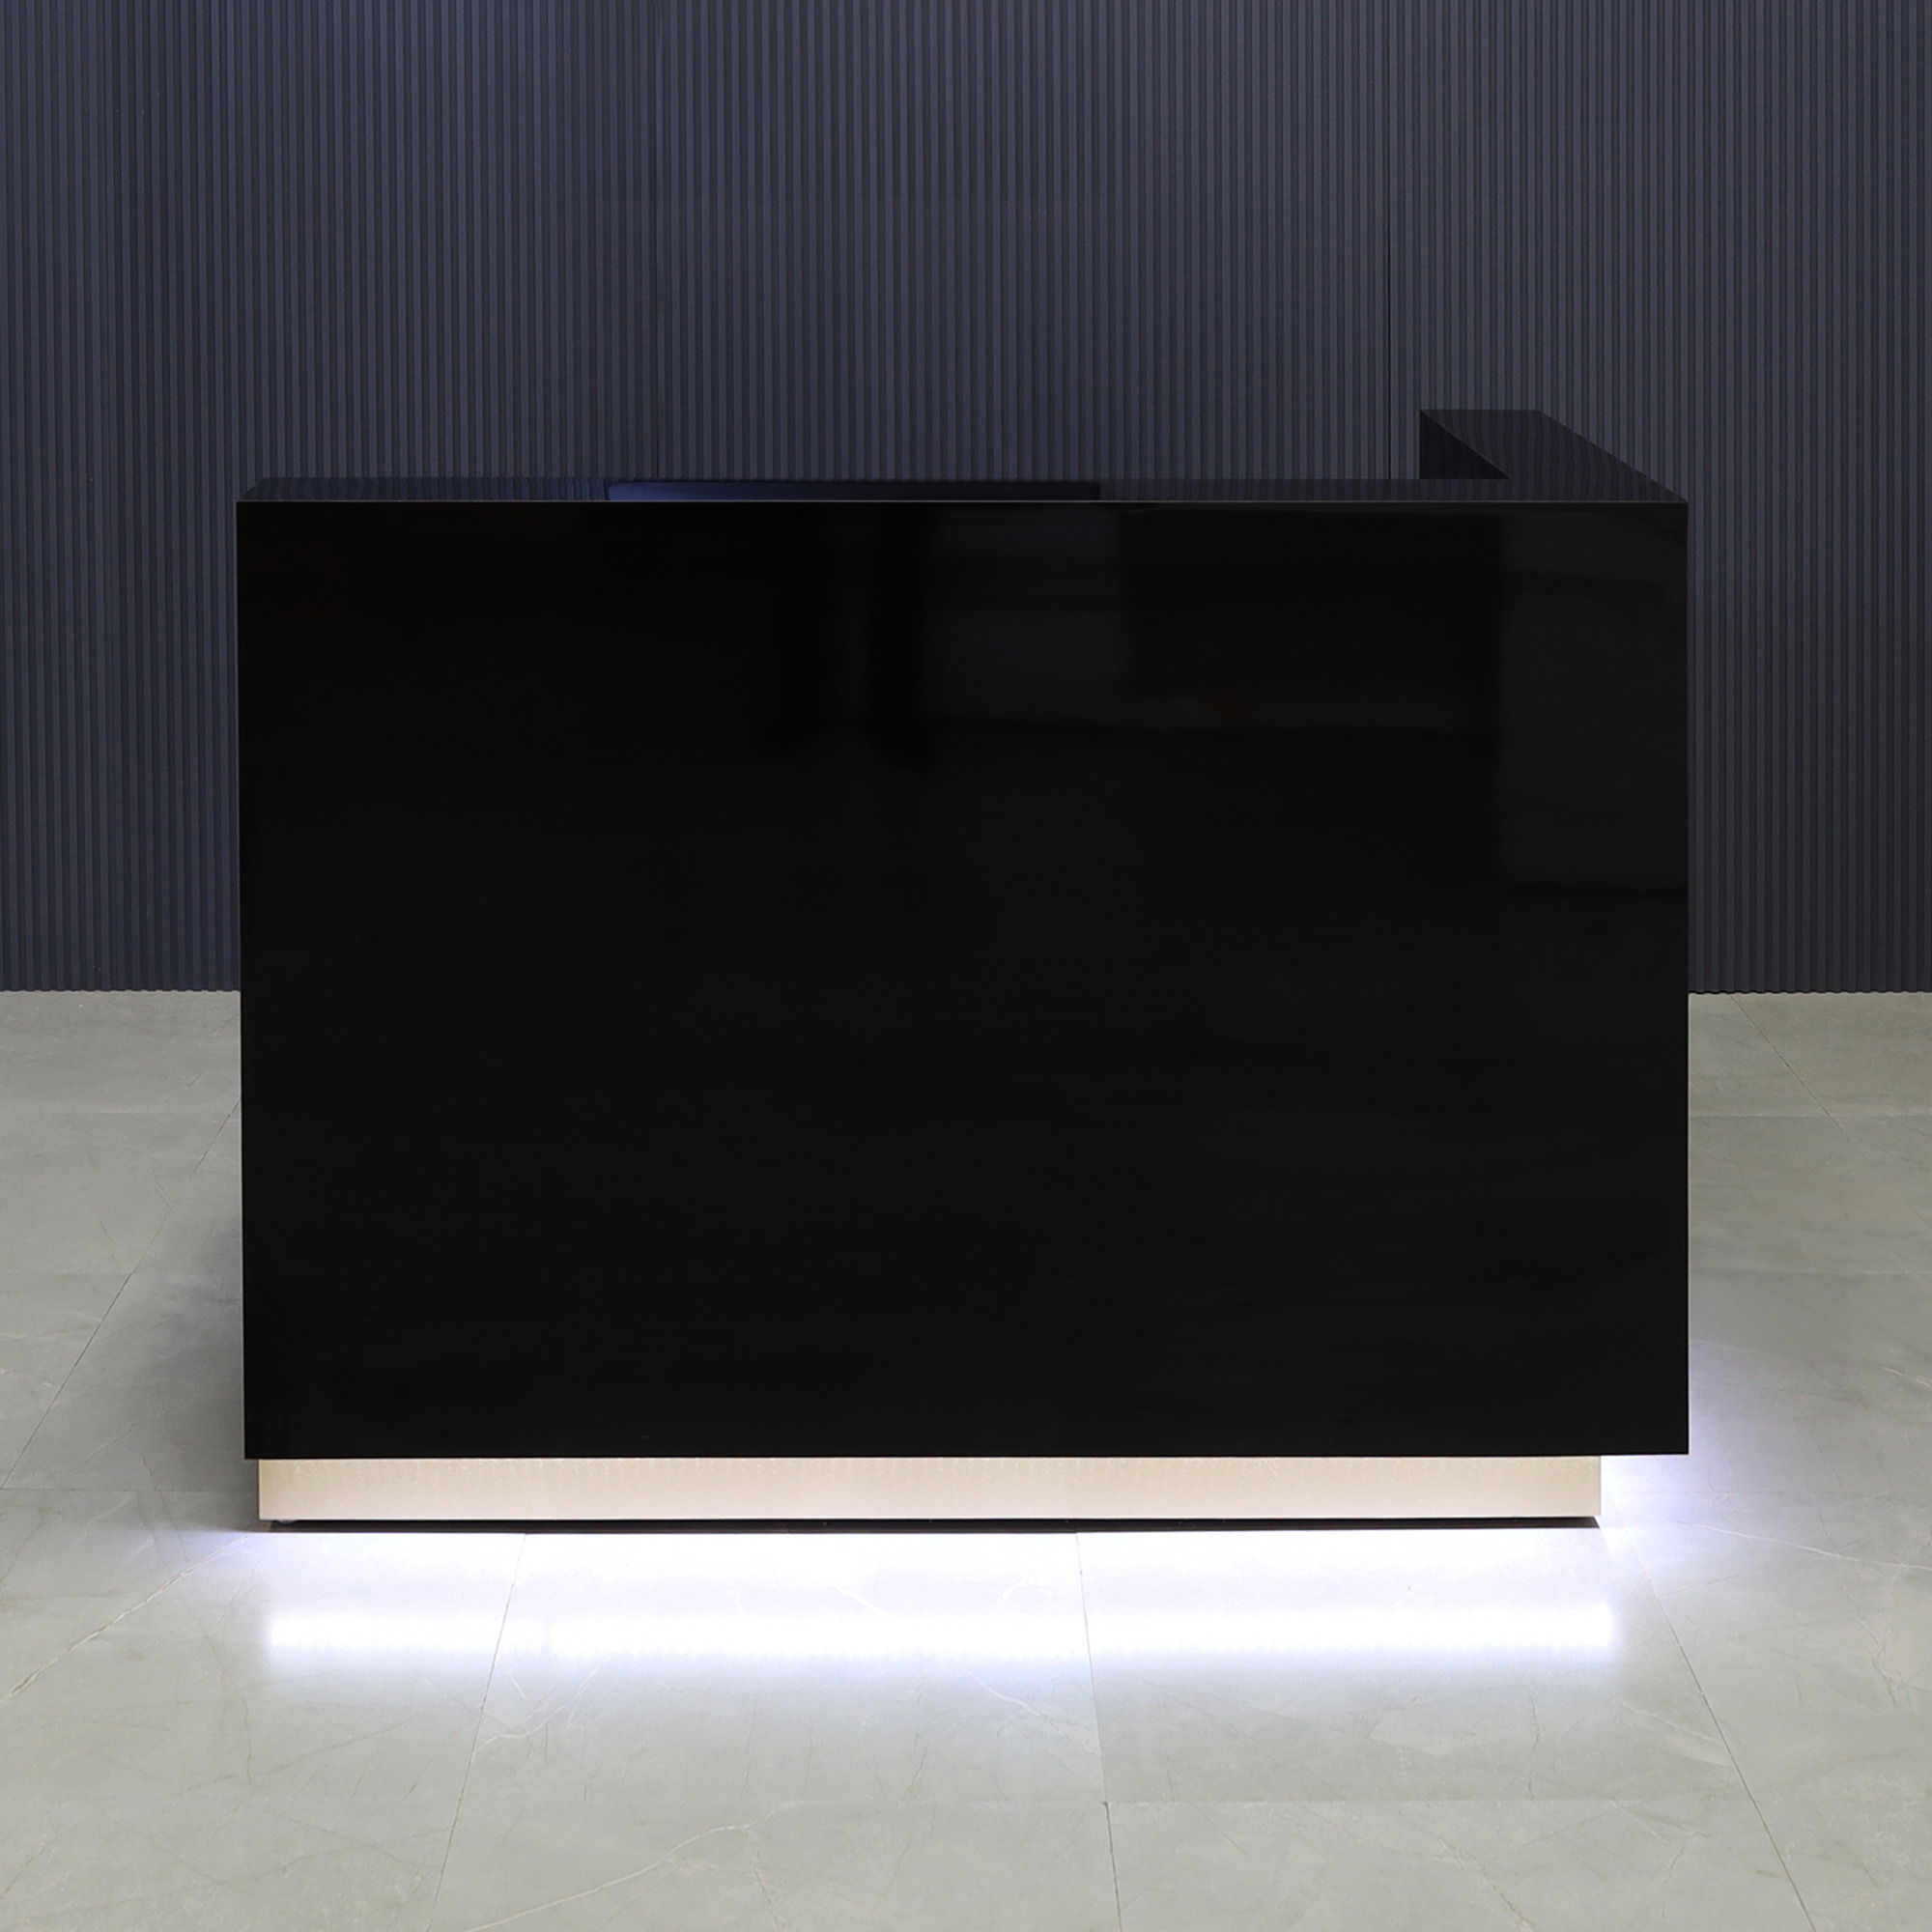 60-inch Dallas L-Shape Custom Reception Desk, right side l-panel when facing front in black gloss laminate main desk and gold toe-kick, with white LED, shown here.